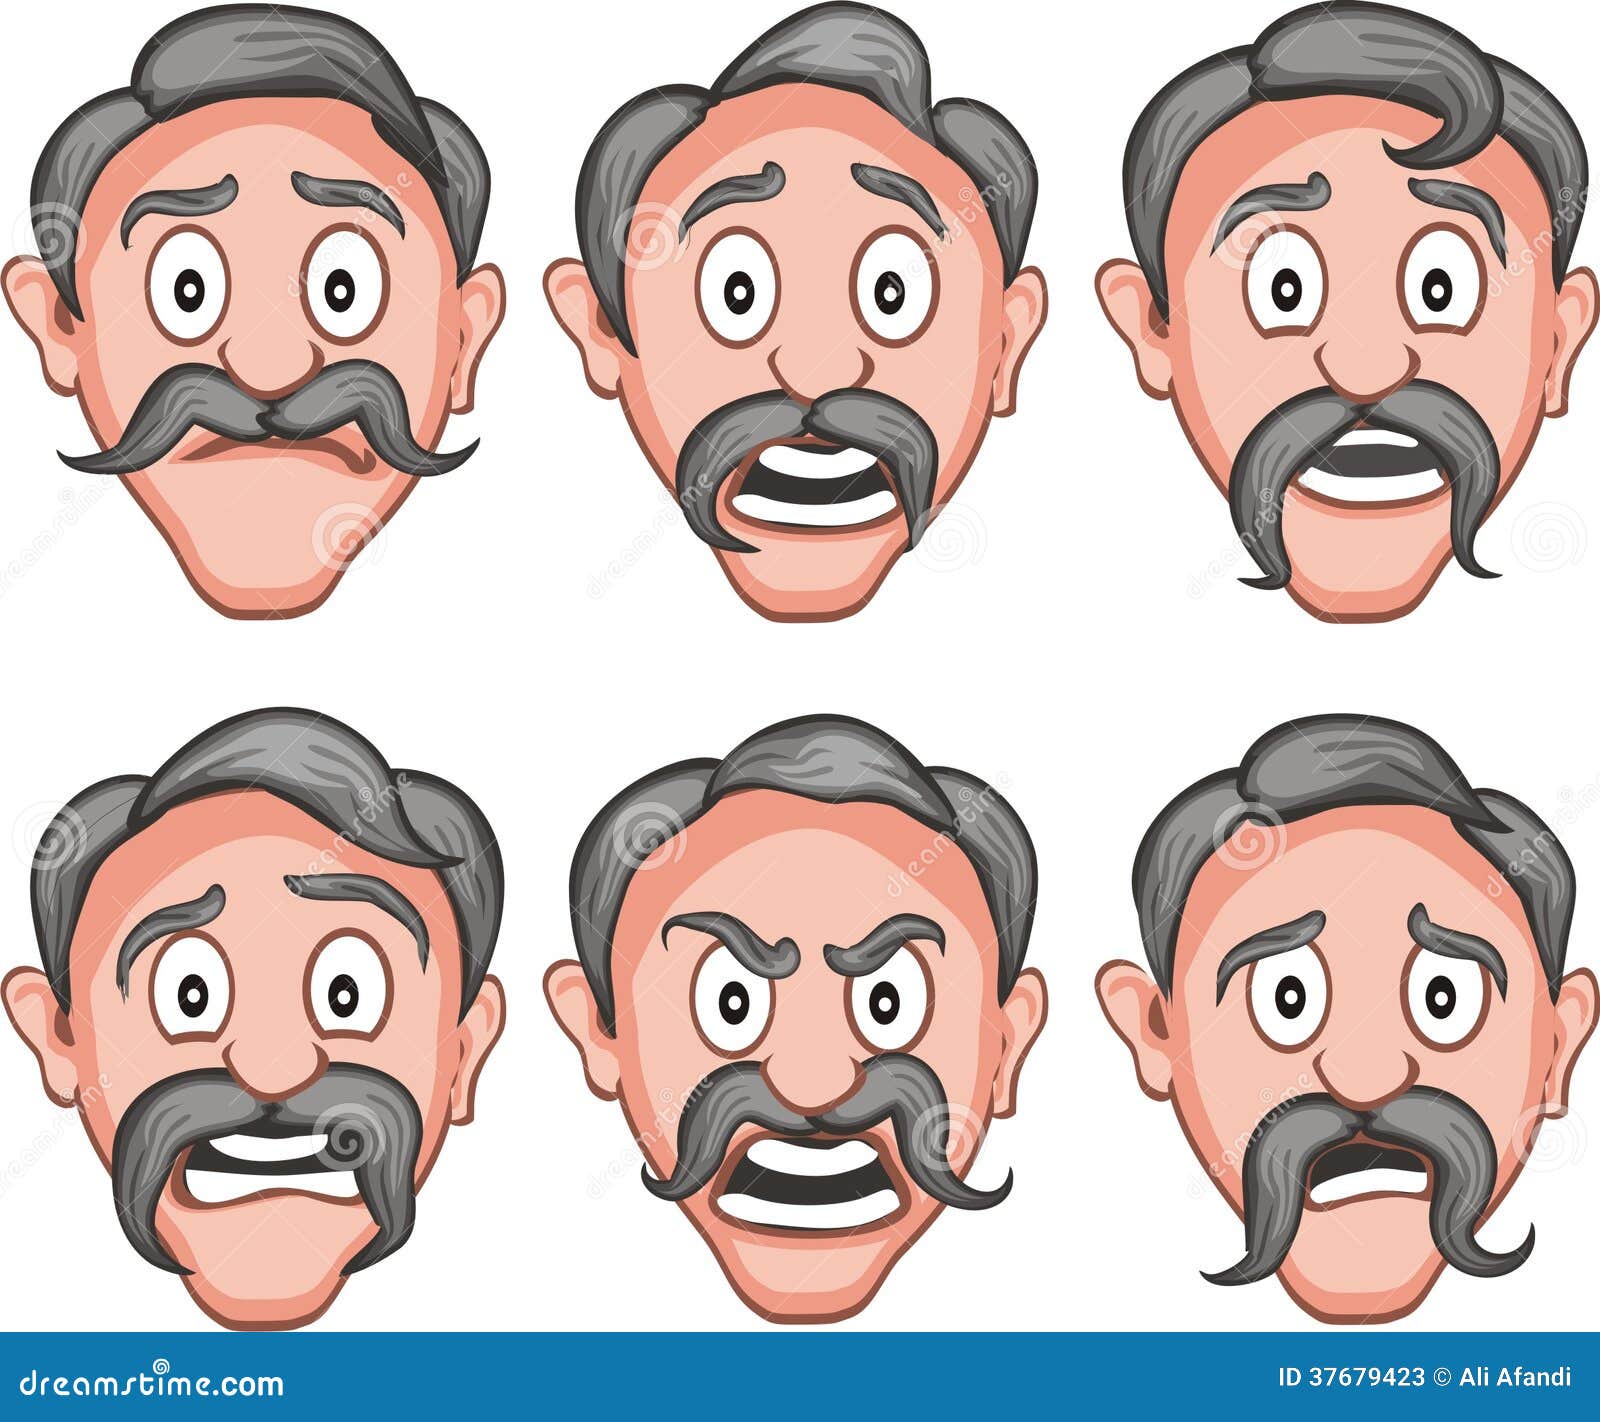 9 expressions